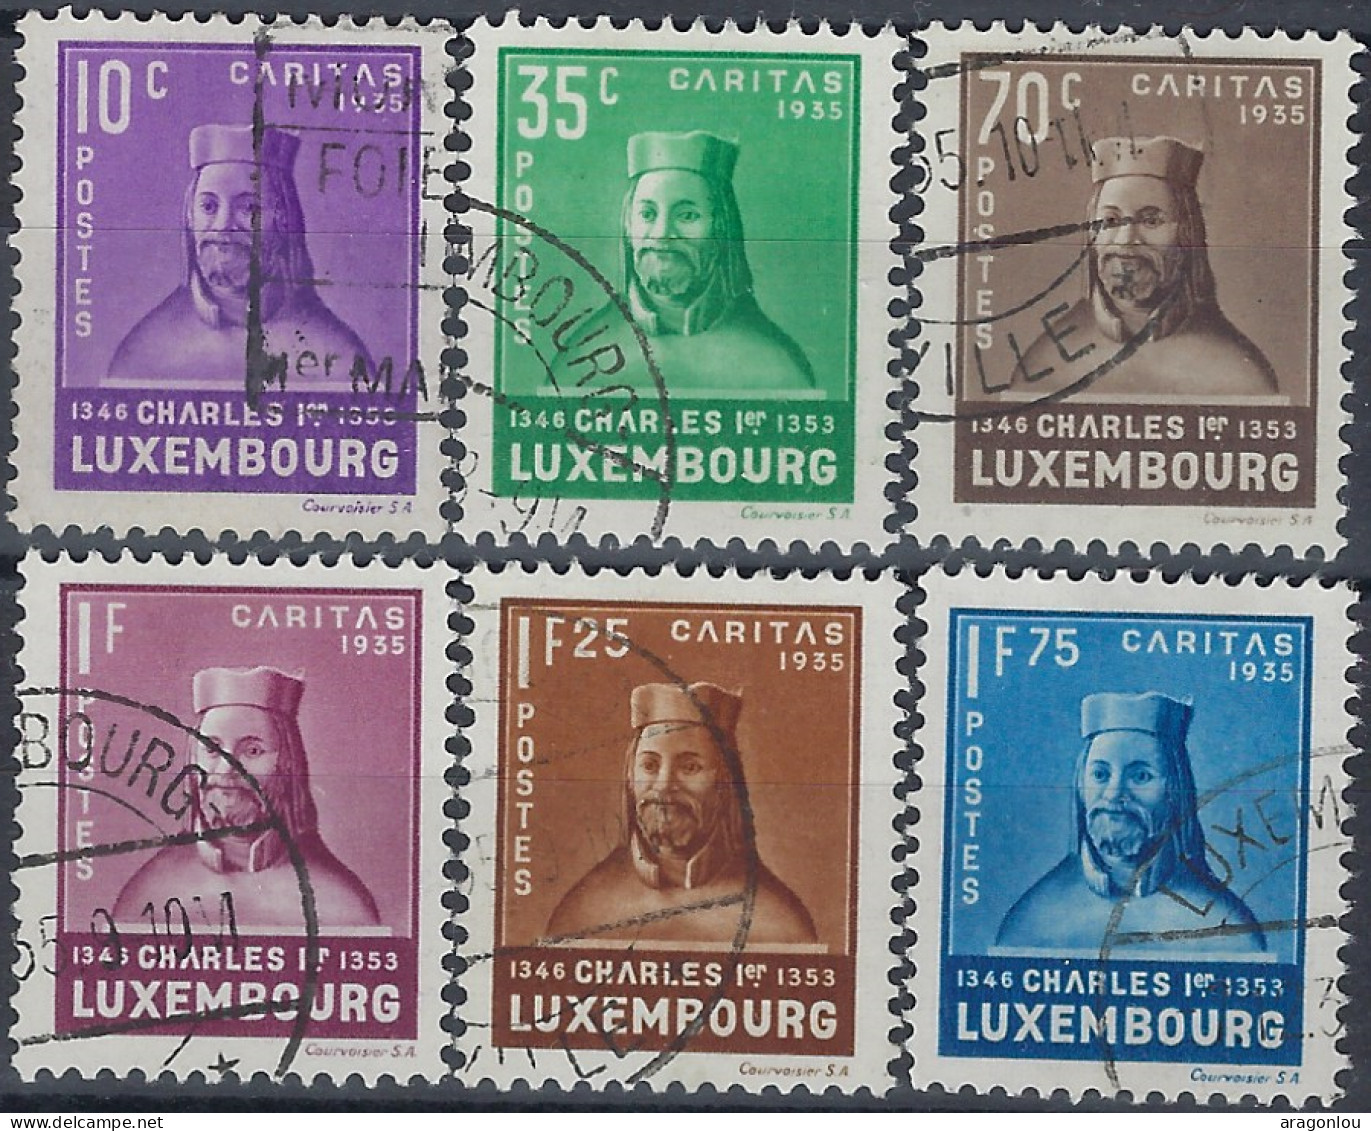 Luxembourg - Luxemburrg - Timbres  1935    Charles Le 1ier     Série   ° - Usati